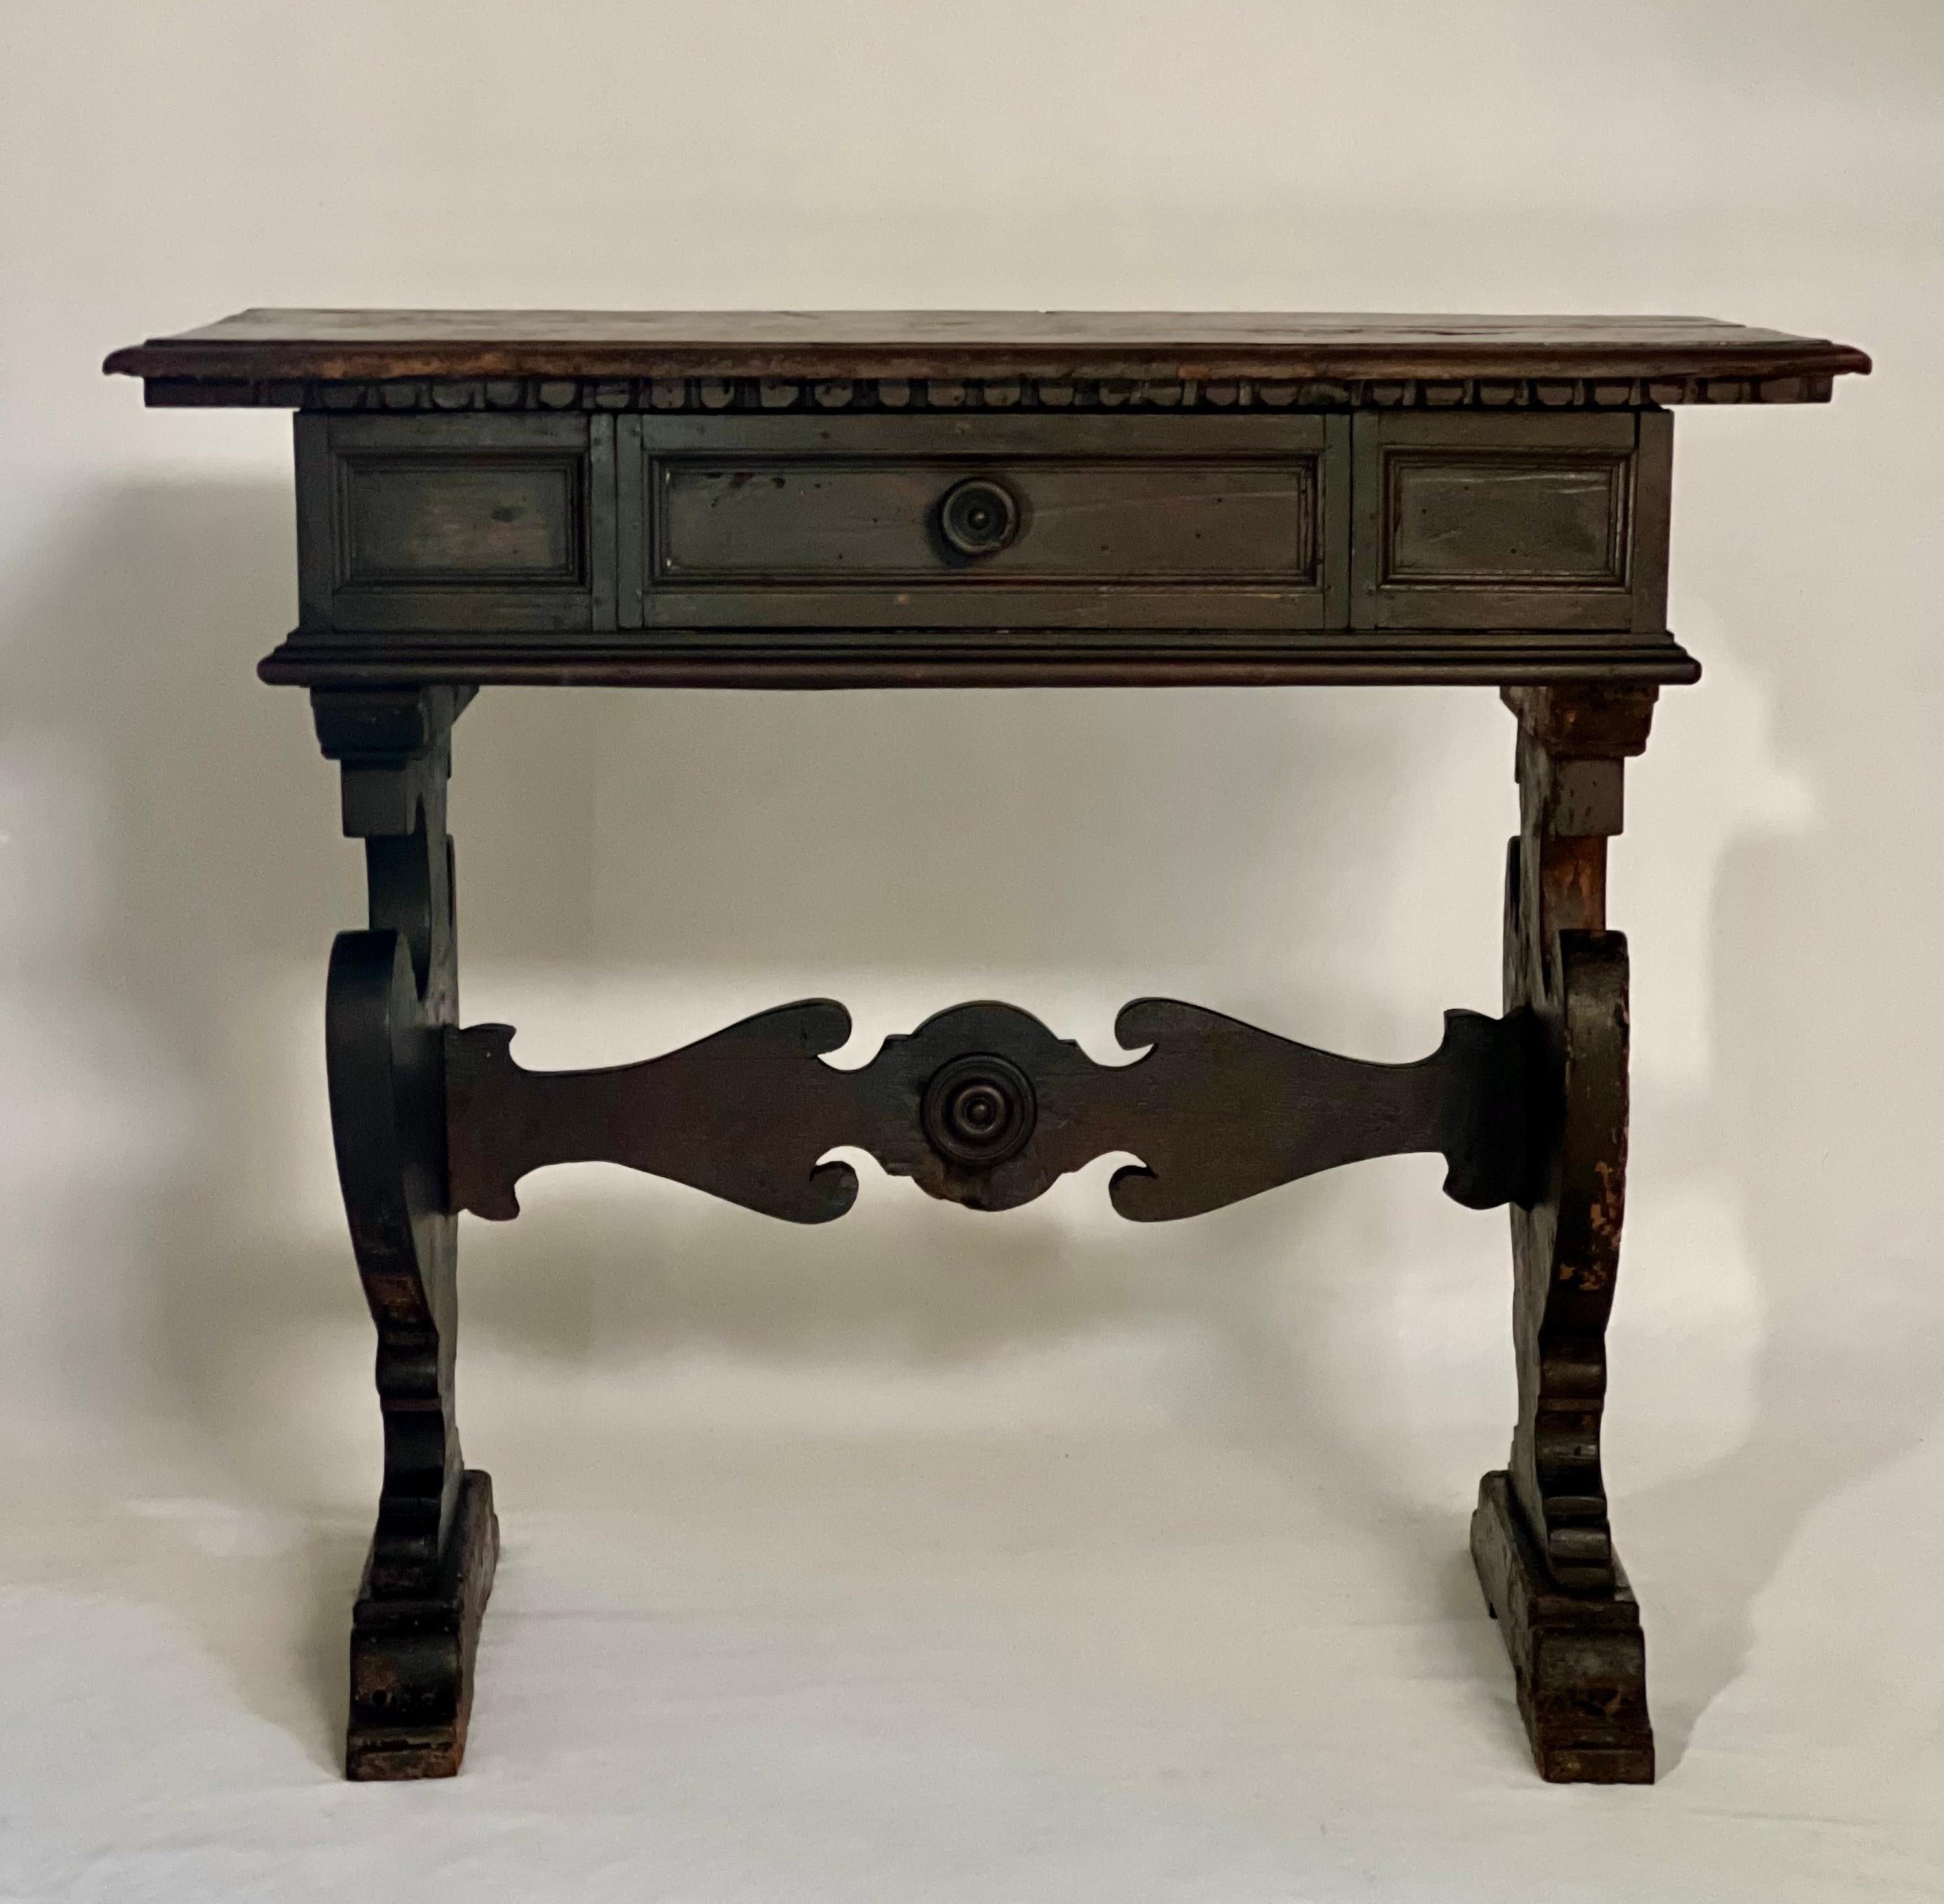 Antique Italian Renaissance Revival carved oak trestle base table, early 19th century.

Great table with dark stained oak and a single lined drawer. It features lots of hand carved details including a sculpted edge rectangular top above a frieze